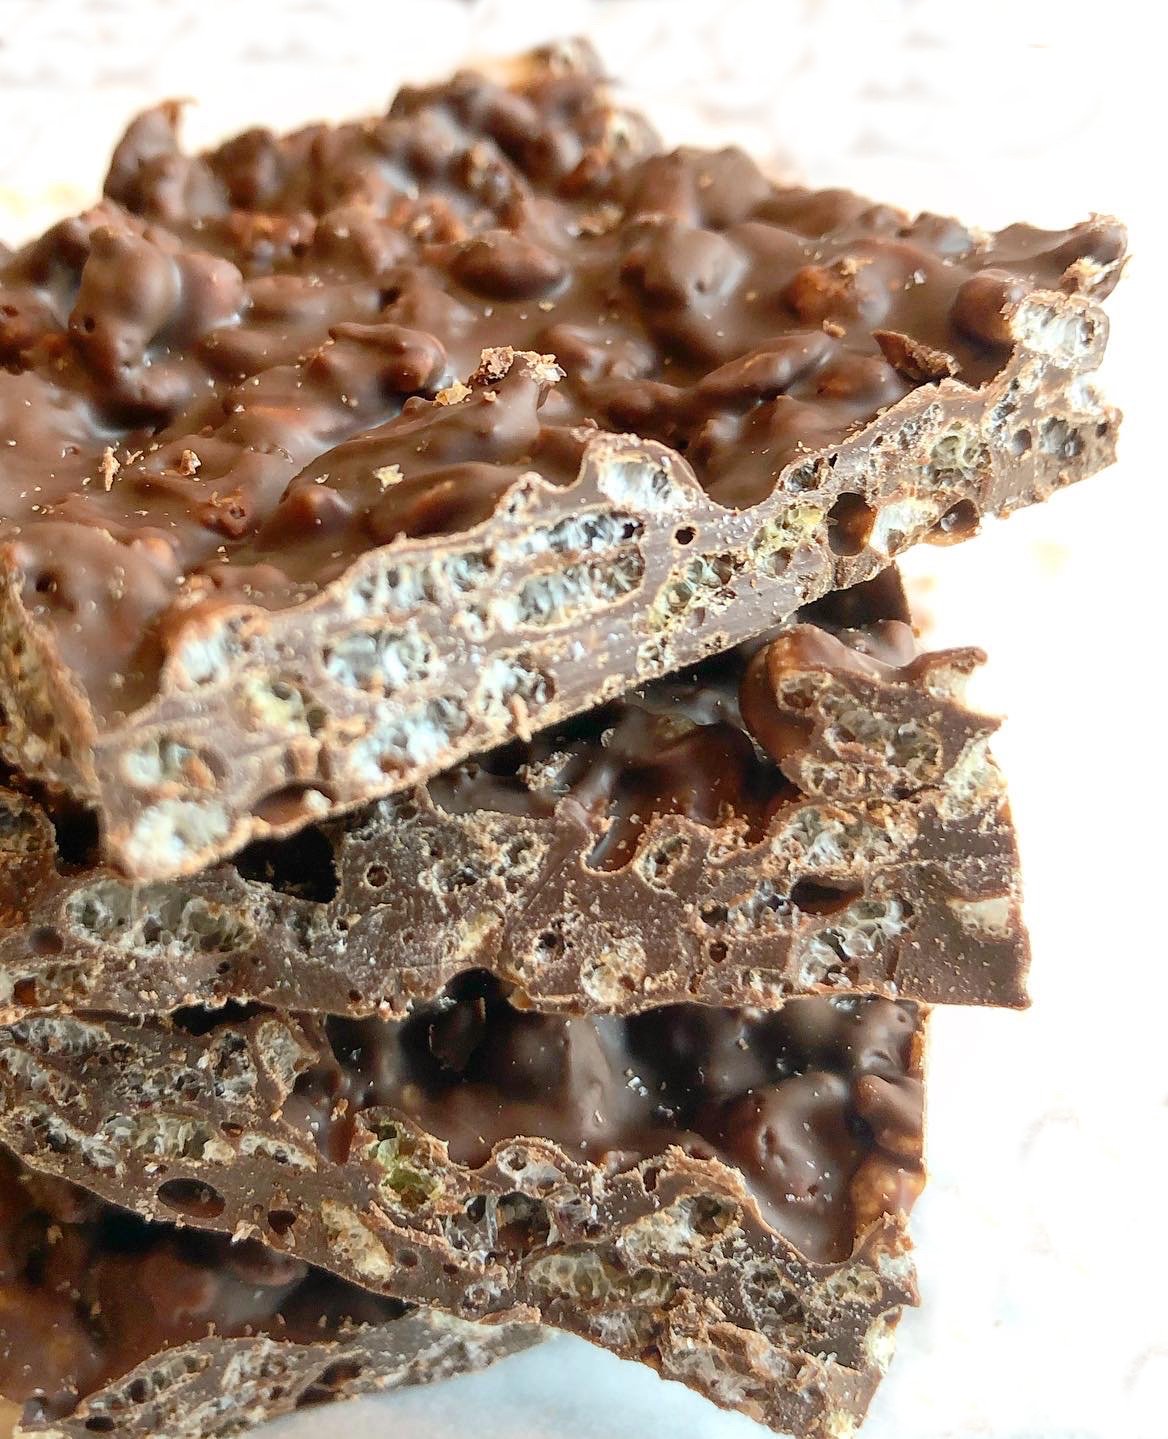 Vegan Chocolate Crunch Bars - Super quick & always popular!  Perfect for holidays, class parties or any time you're craving a sweet & simple candy treat. via @thiswifecooks